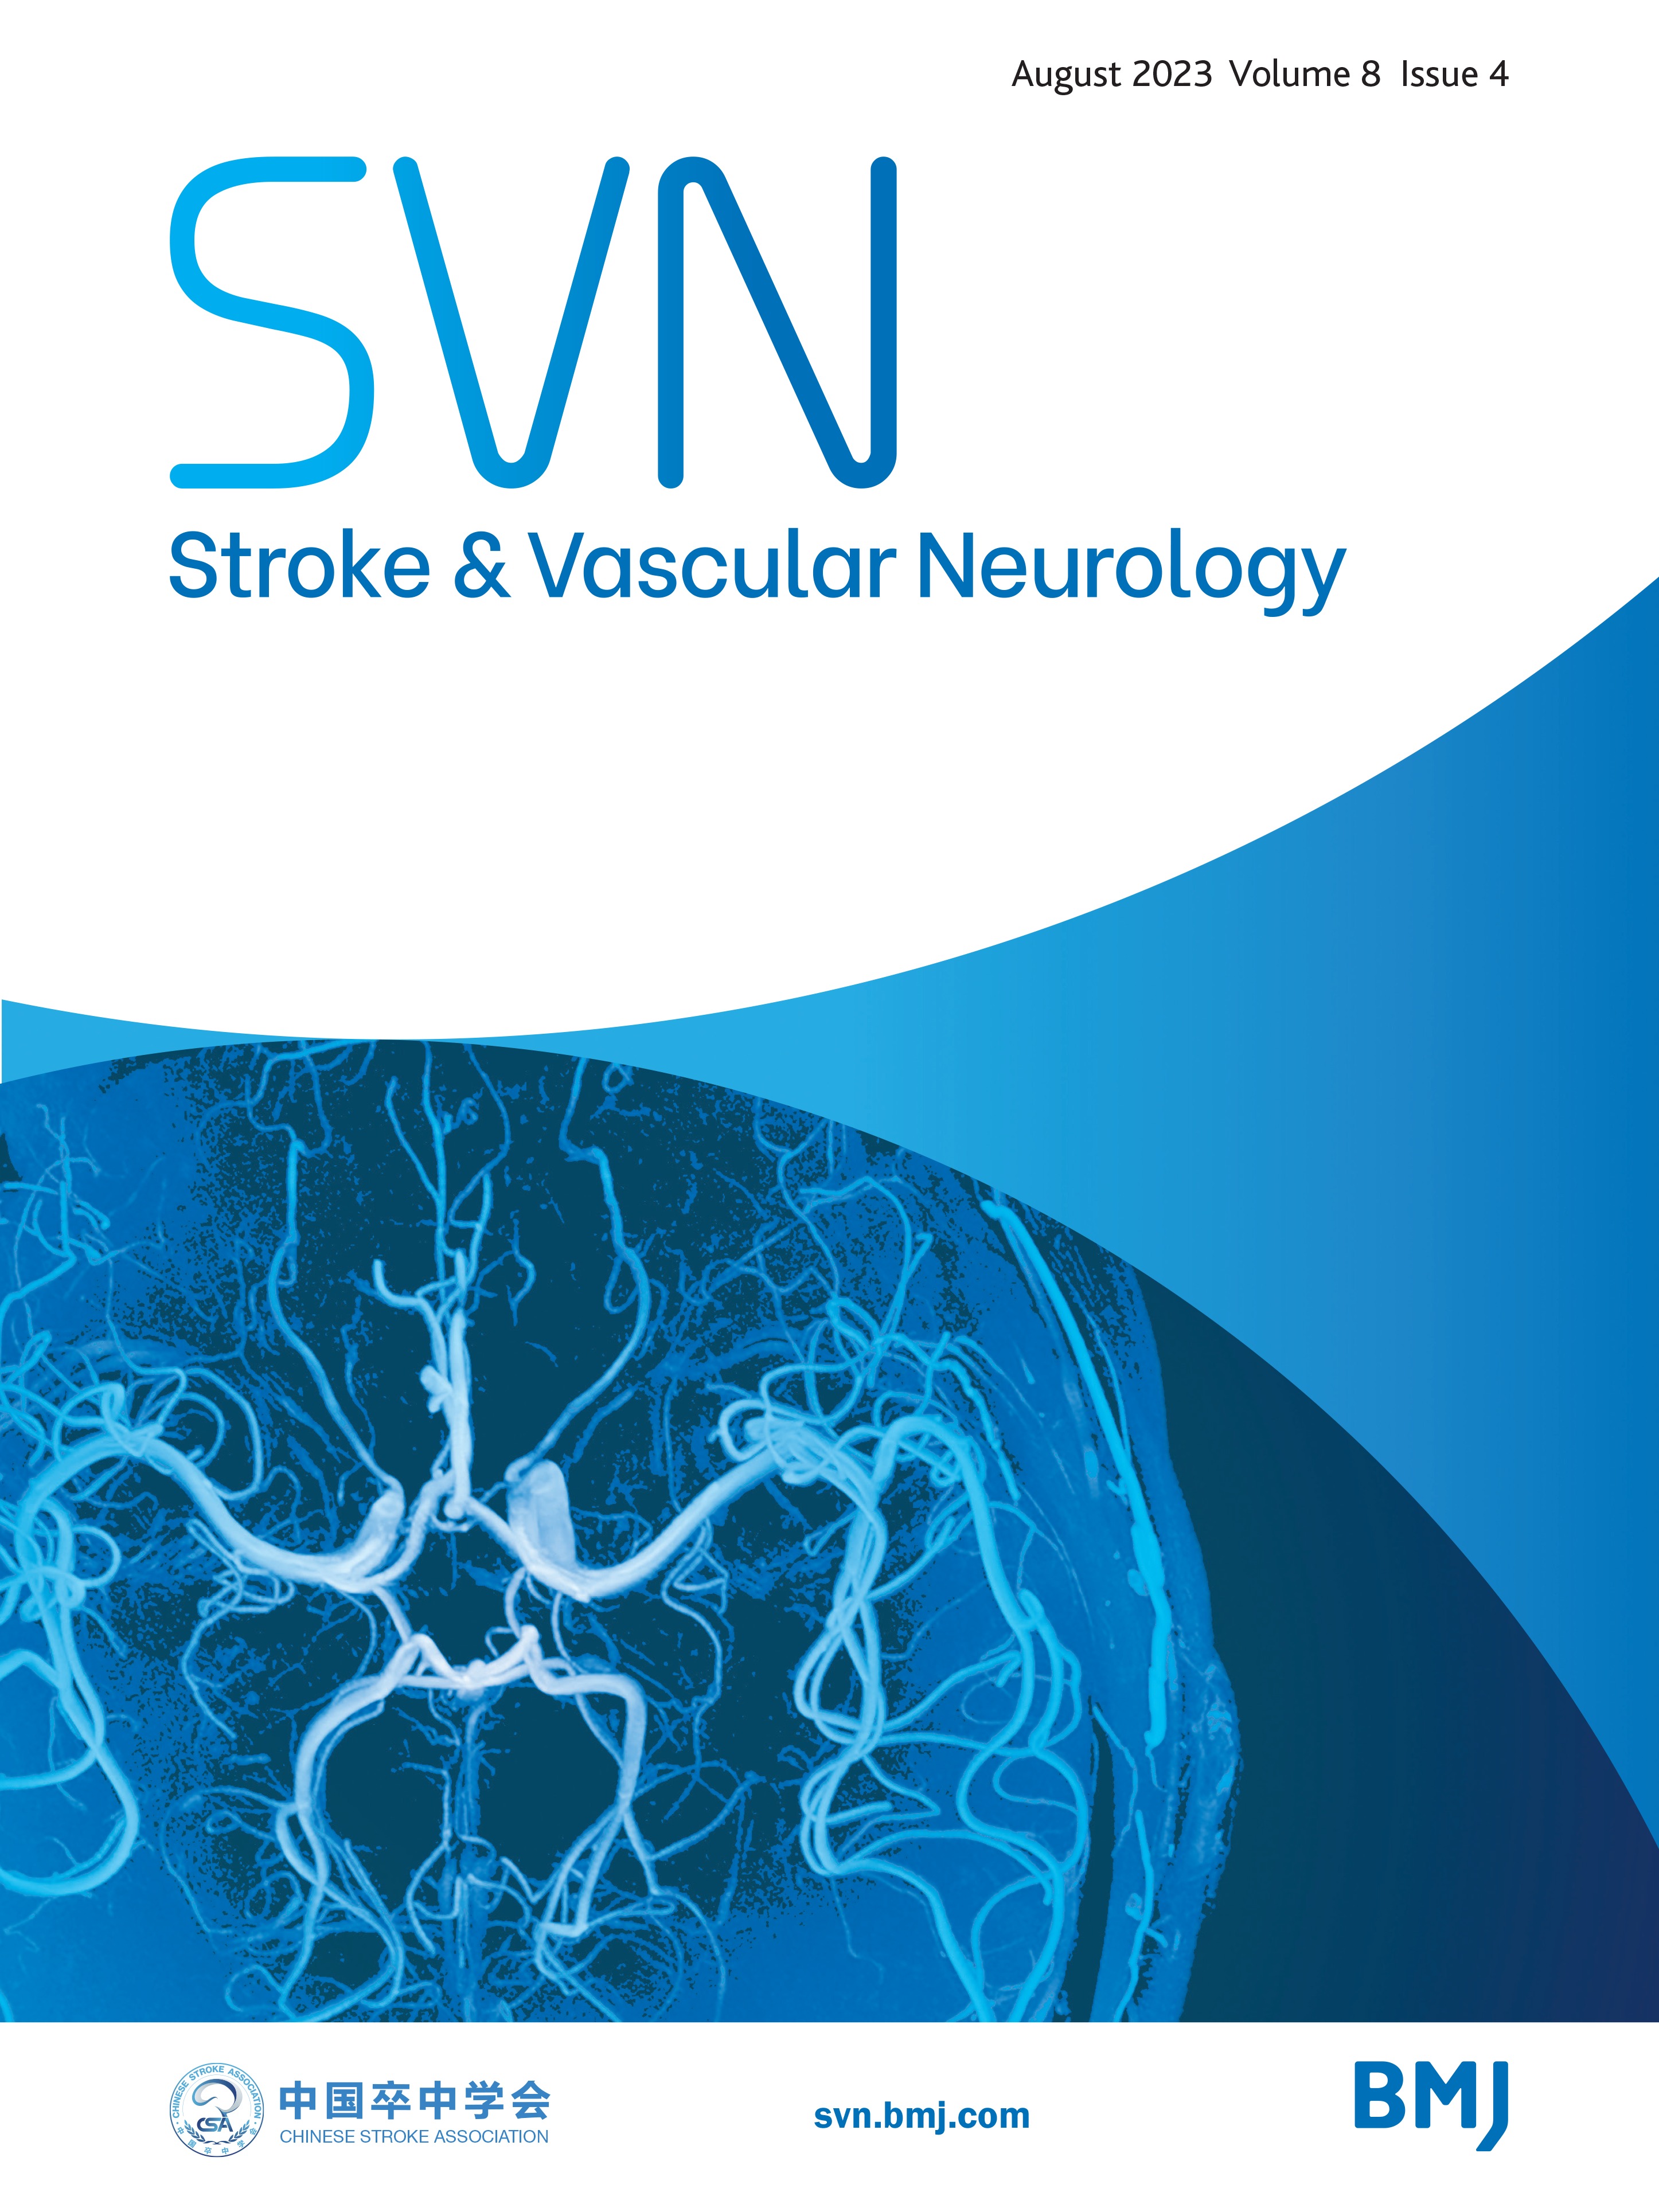 Acute right insular ischaemic lesions and poststroke left ventricular dysfunction